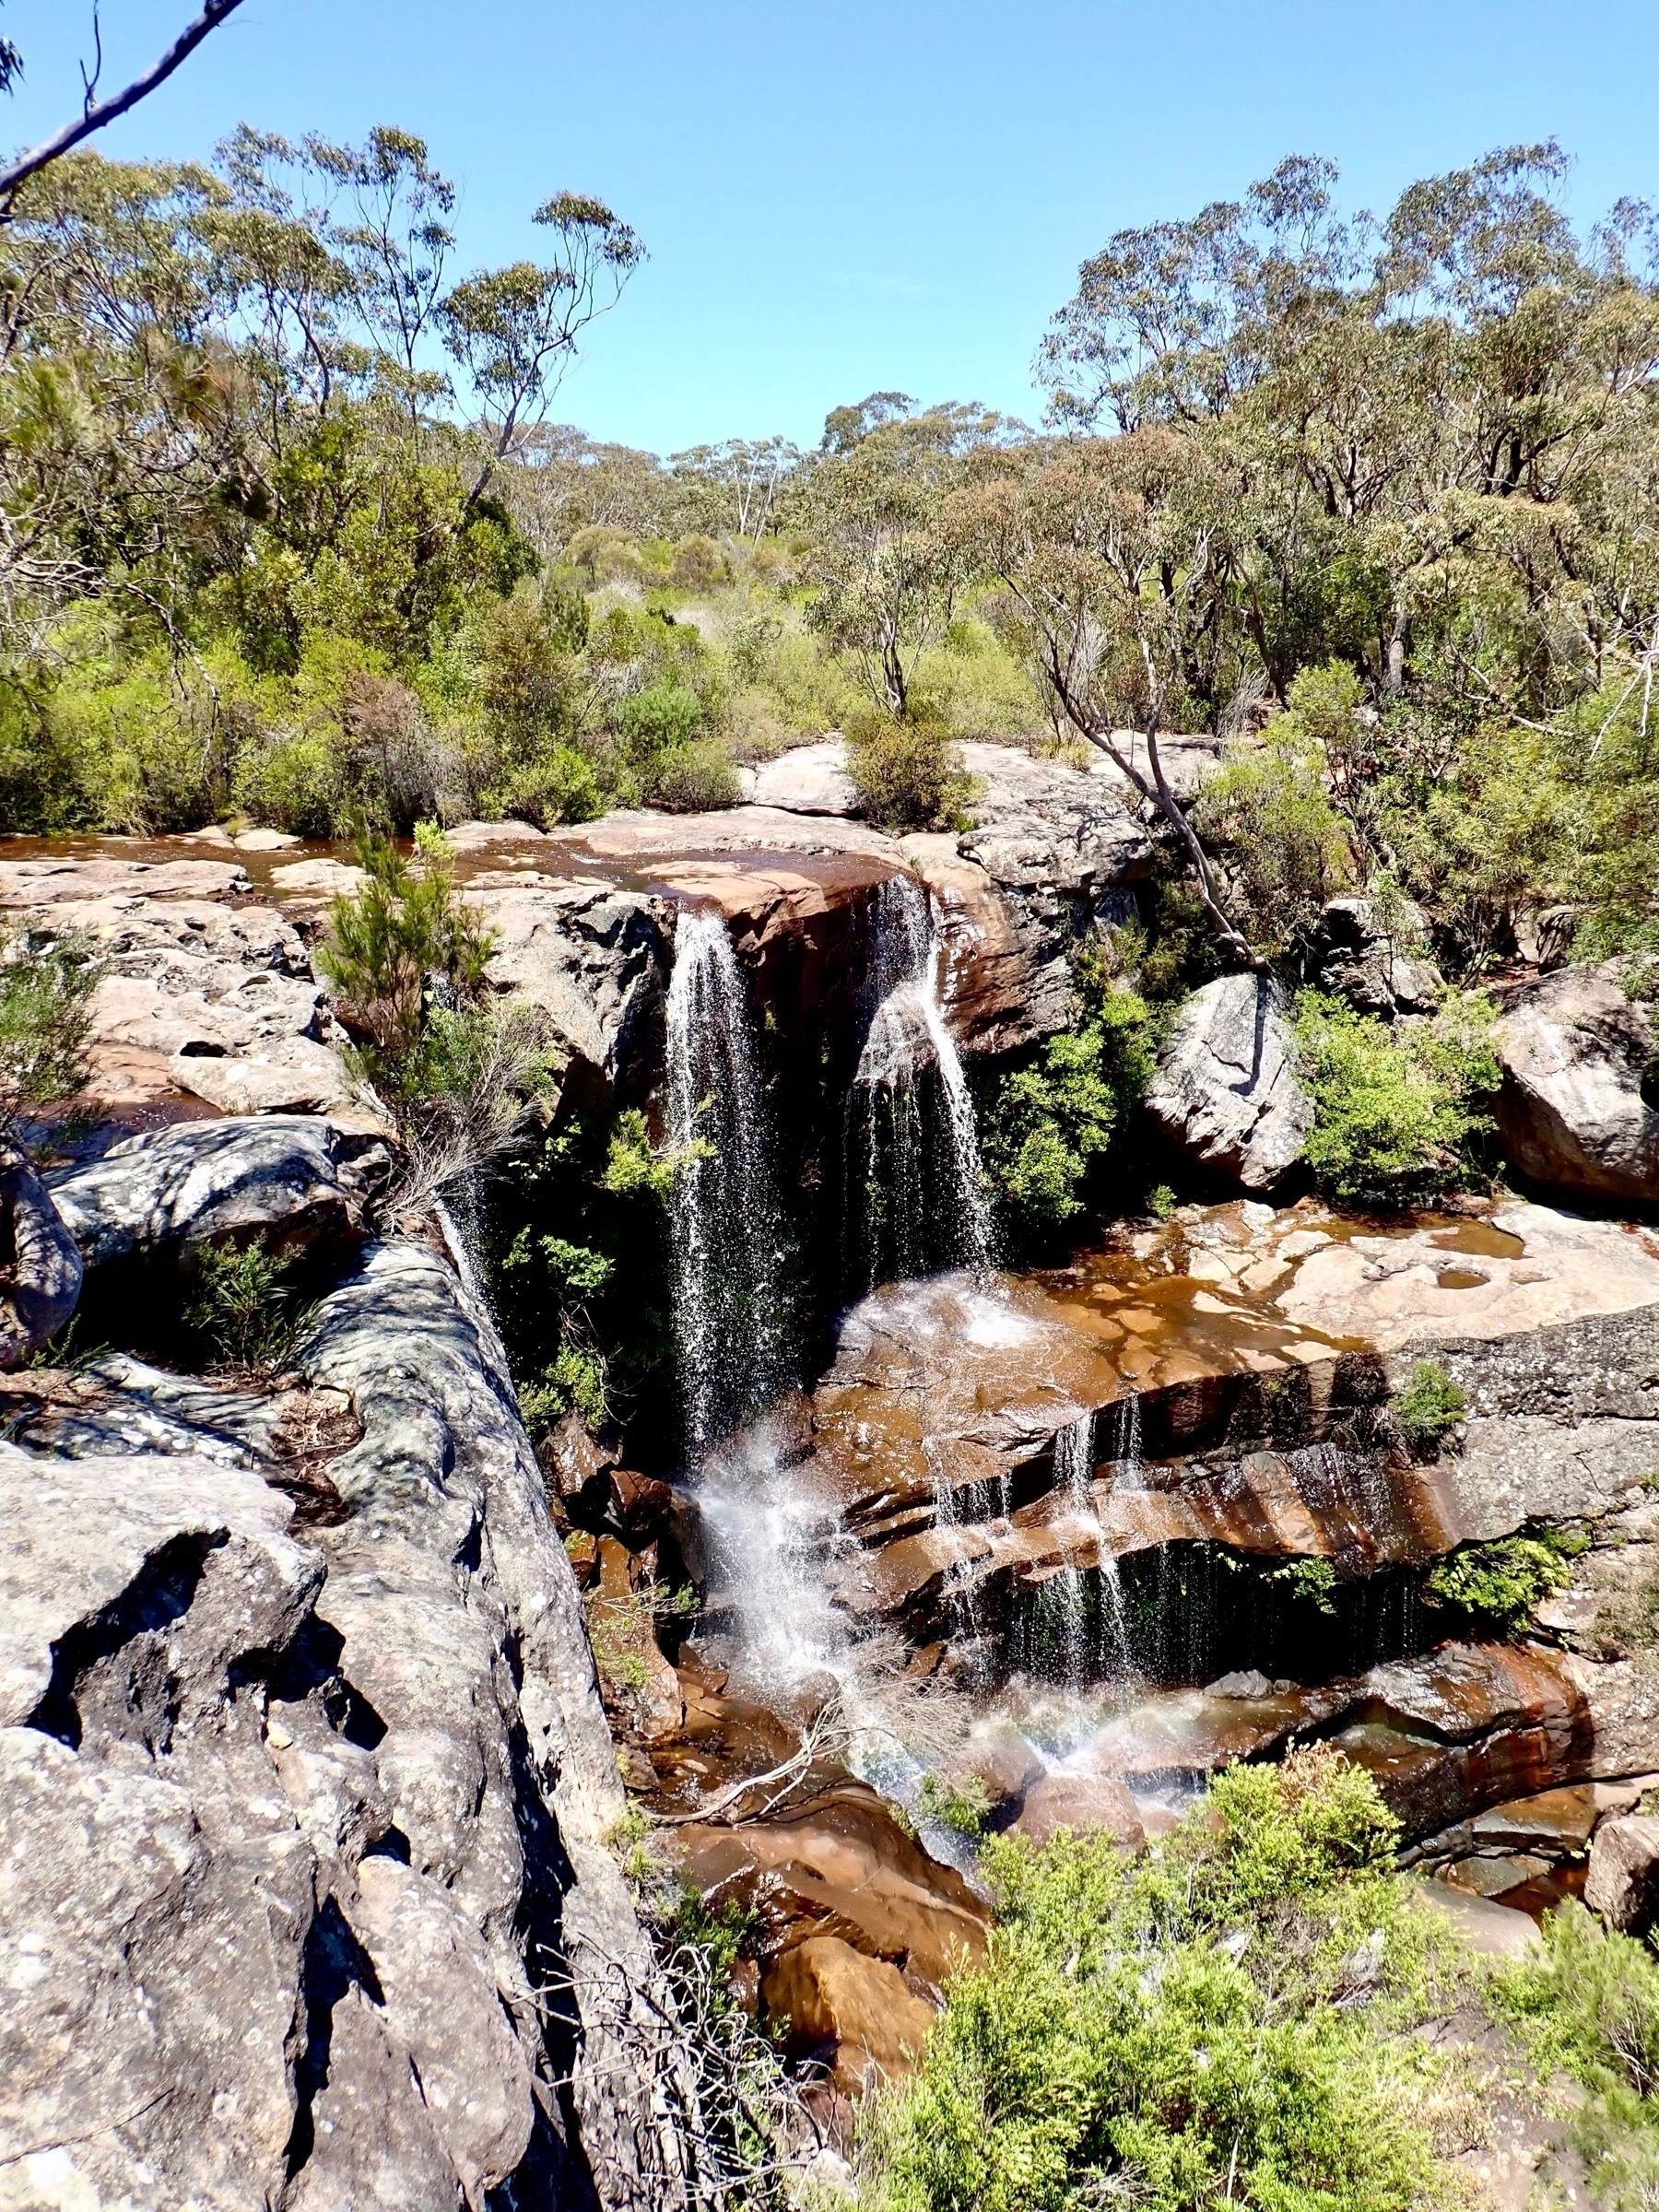 A rocky waterfall surrounded by gum trees